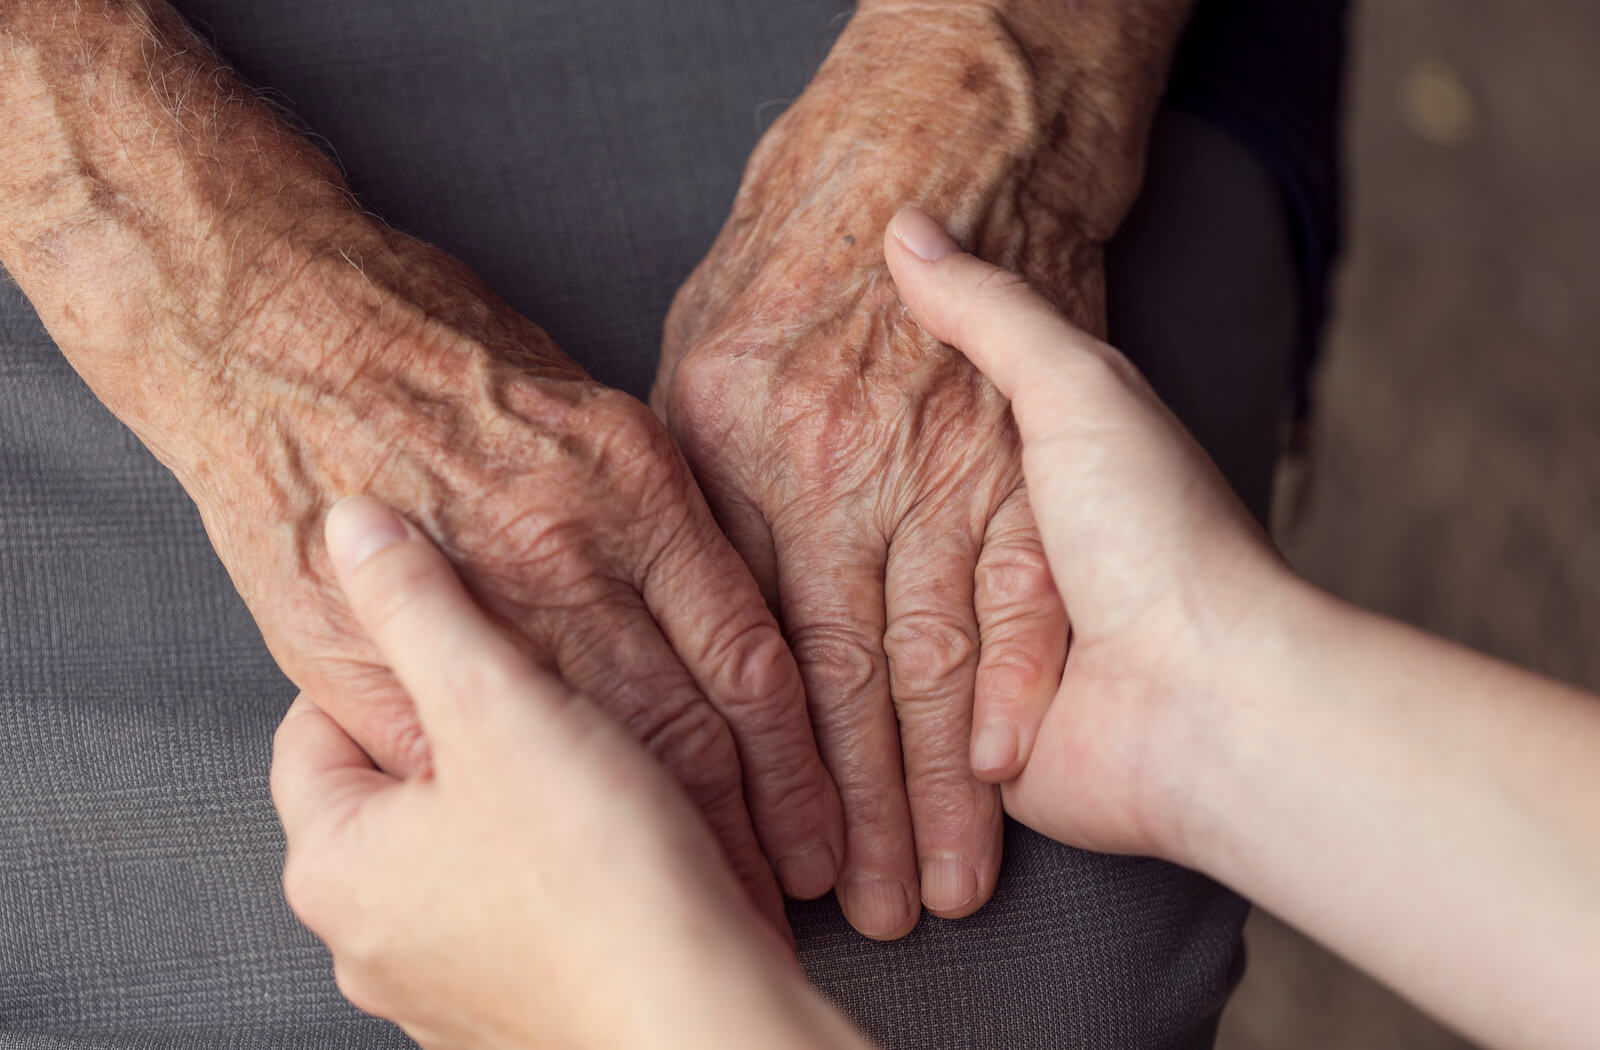 a young person holds a senior's hands in support